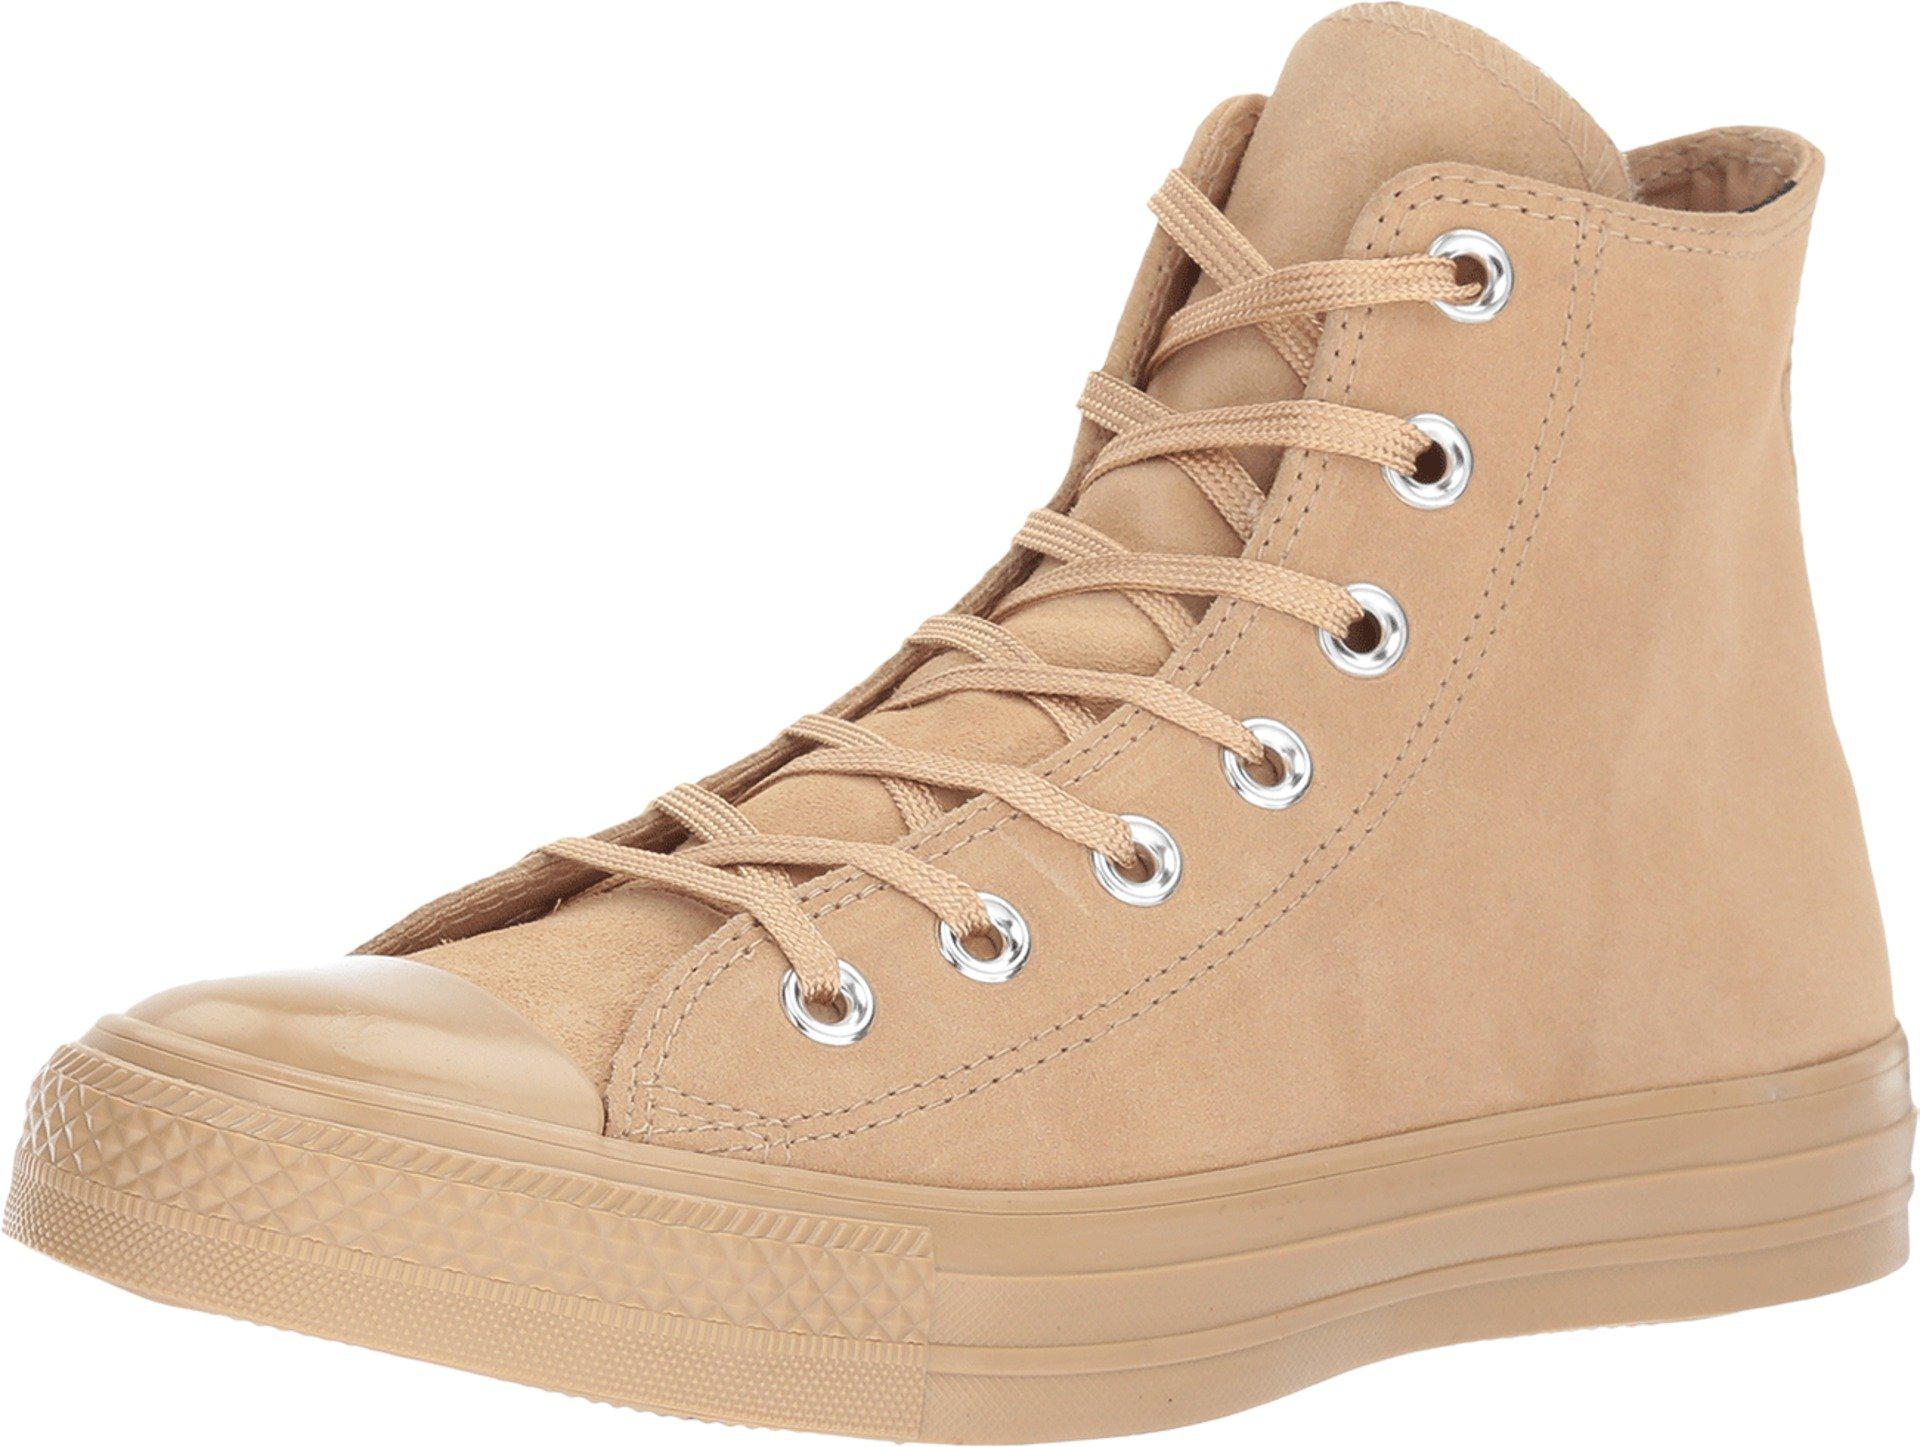 Converse Chuck Taylor All Star - Mono Plush Suede Hi in Natural | Lyst